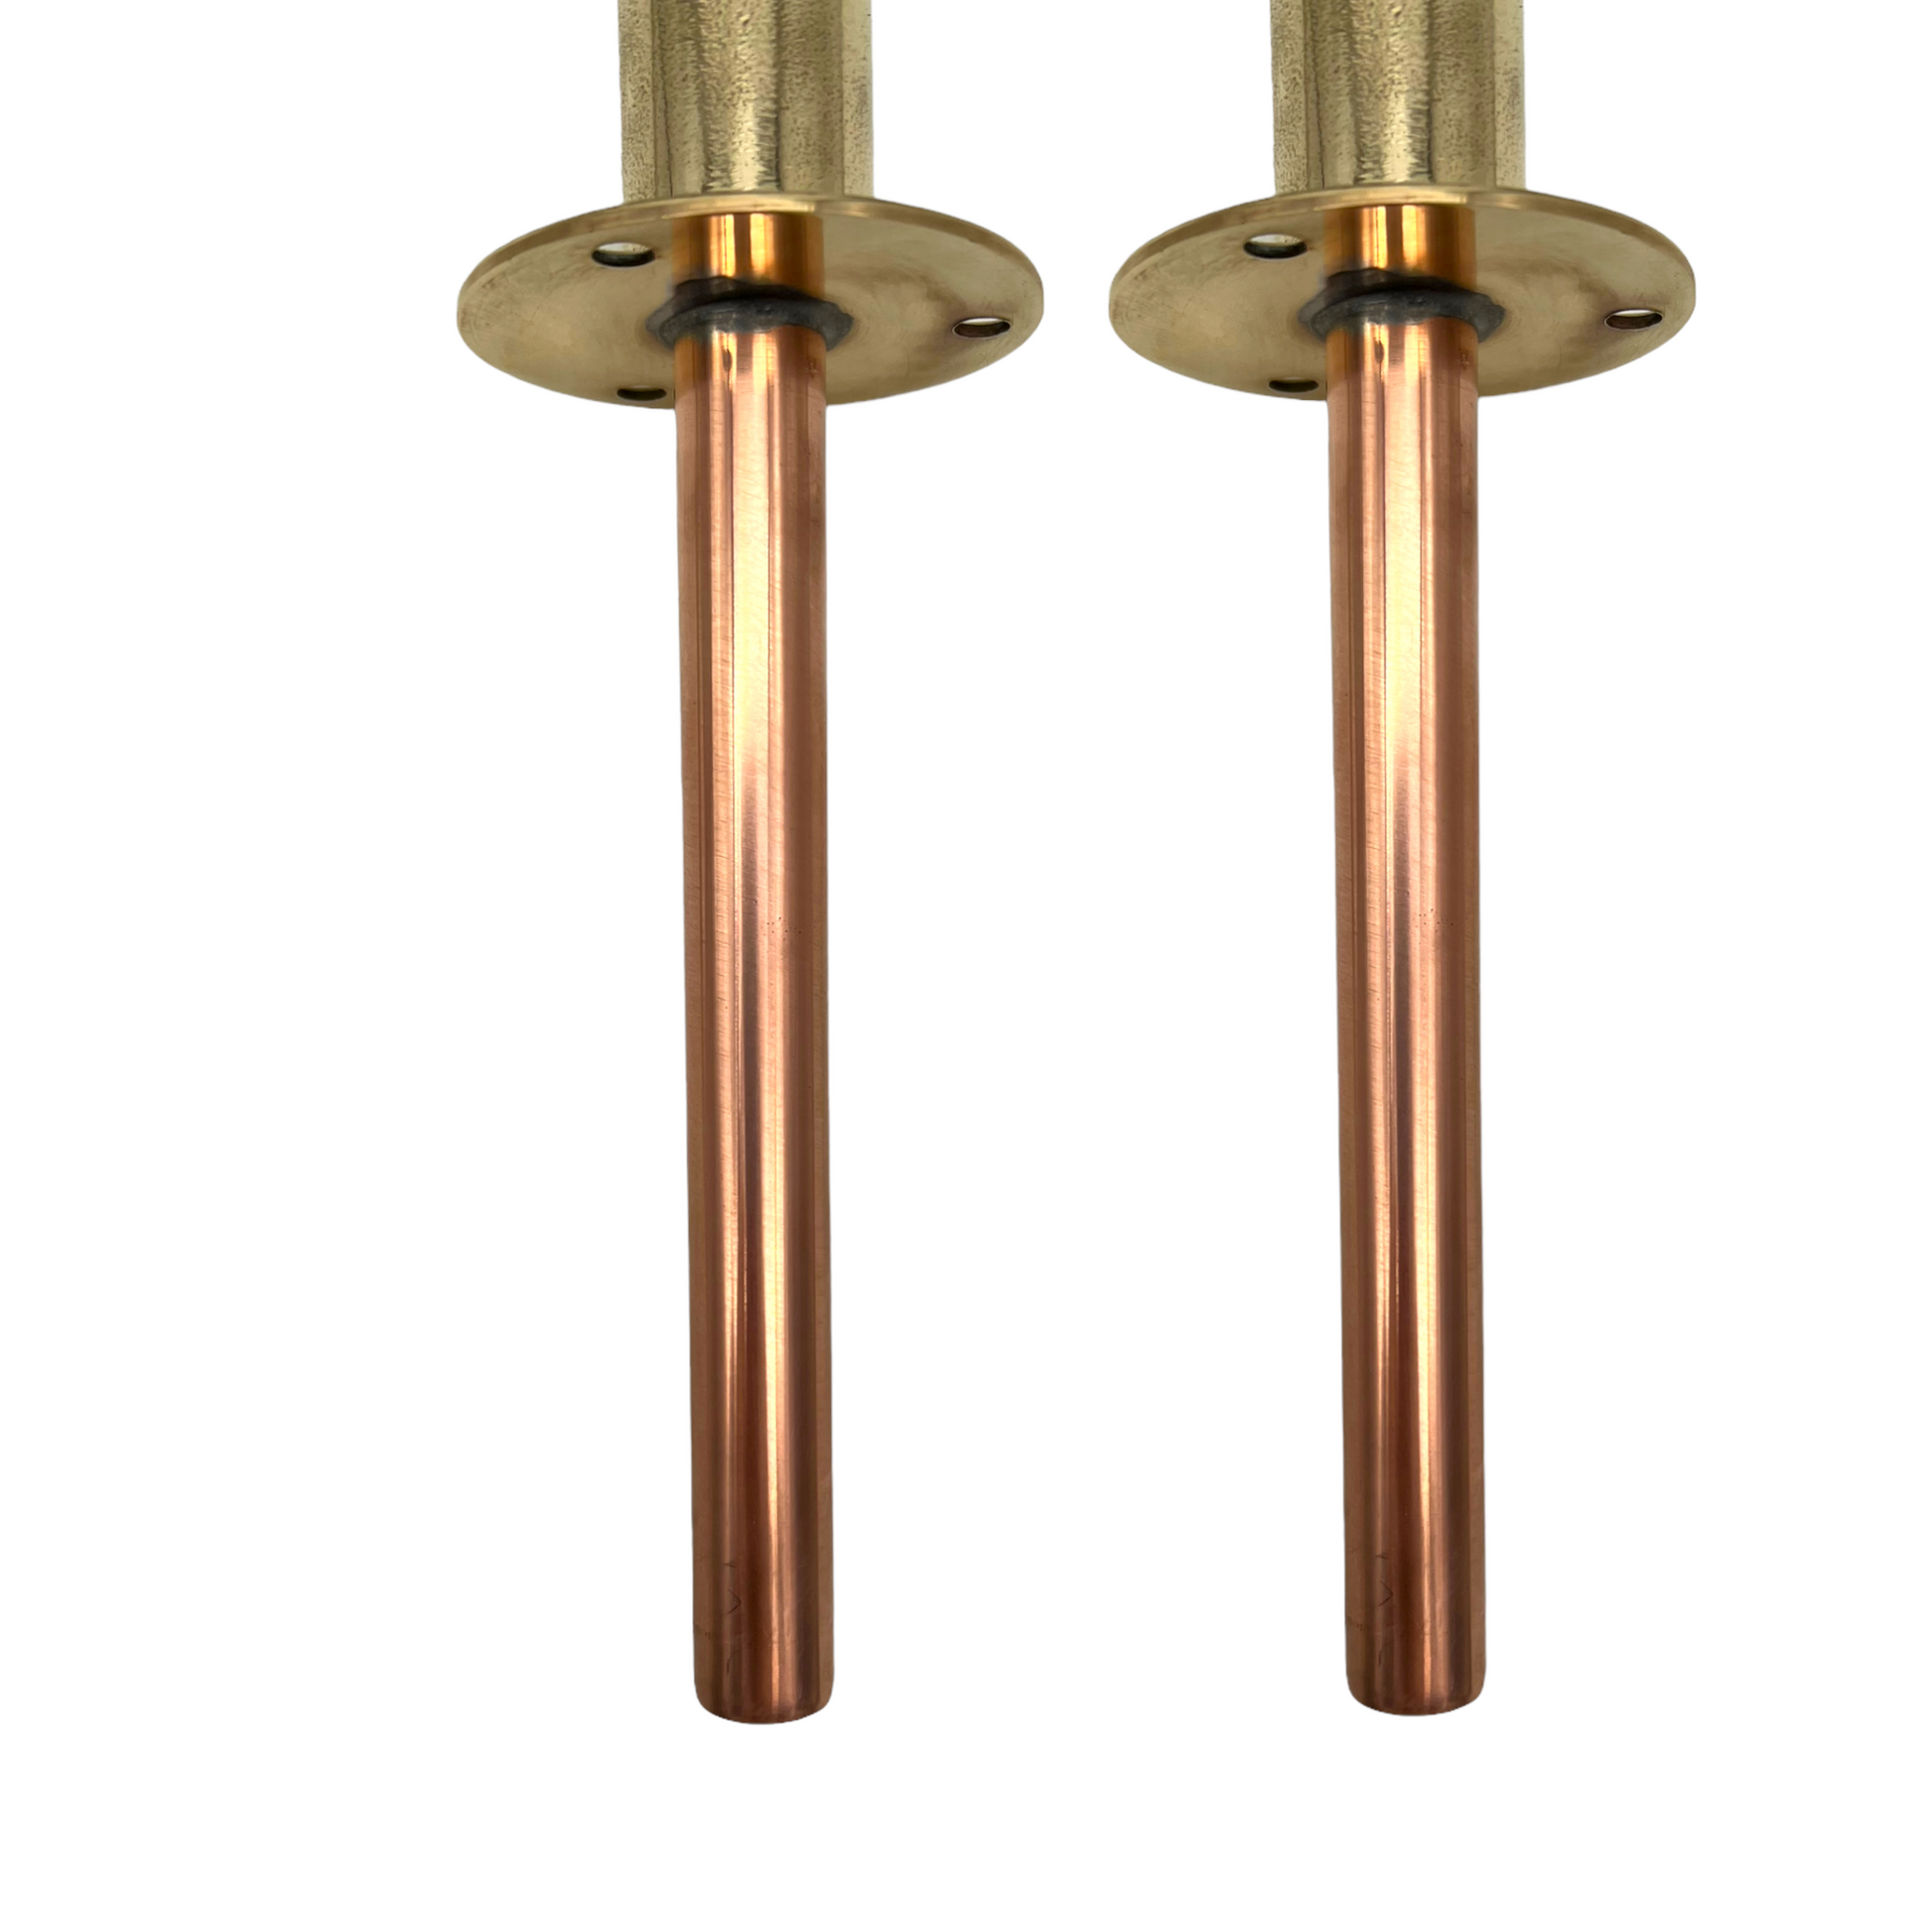 image 10 rustic copper and brass kitchen Belfast sink taps sold by All Things French Store